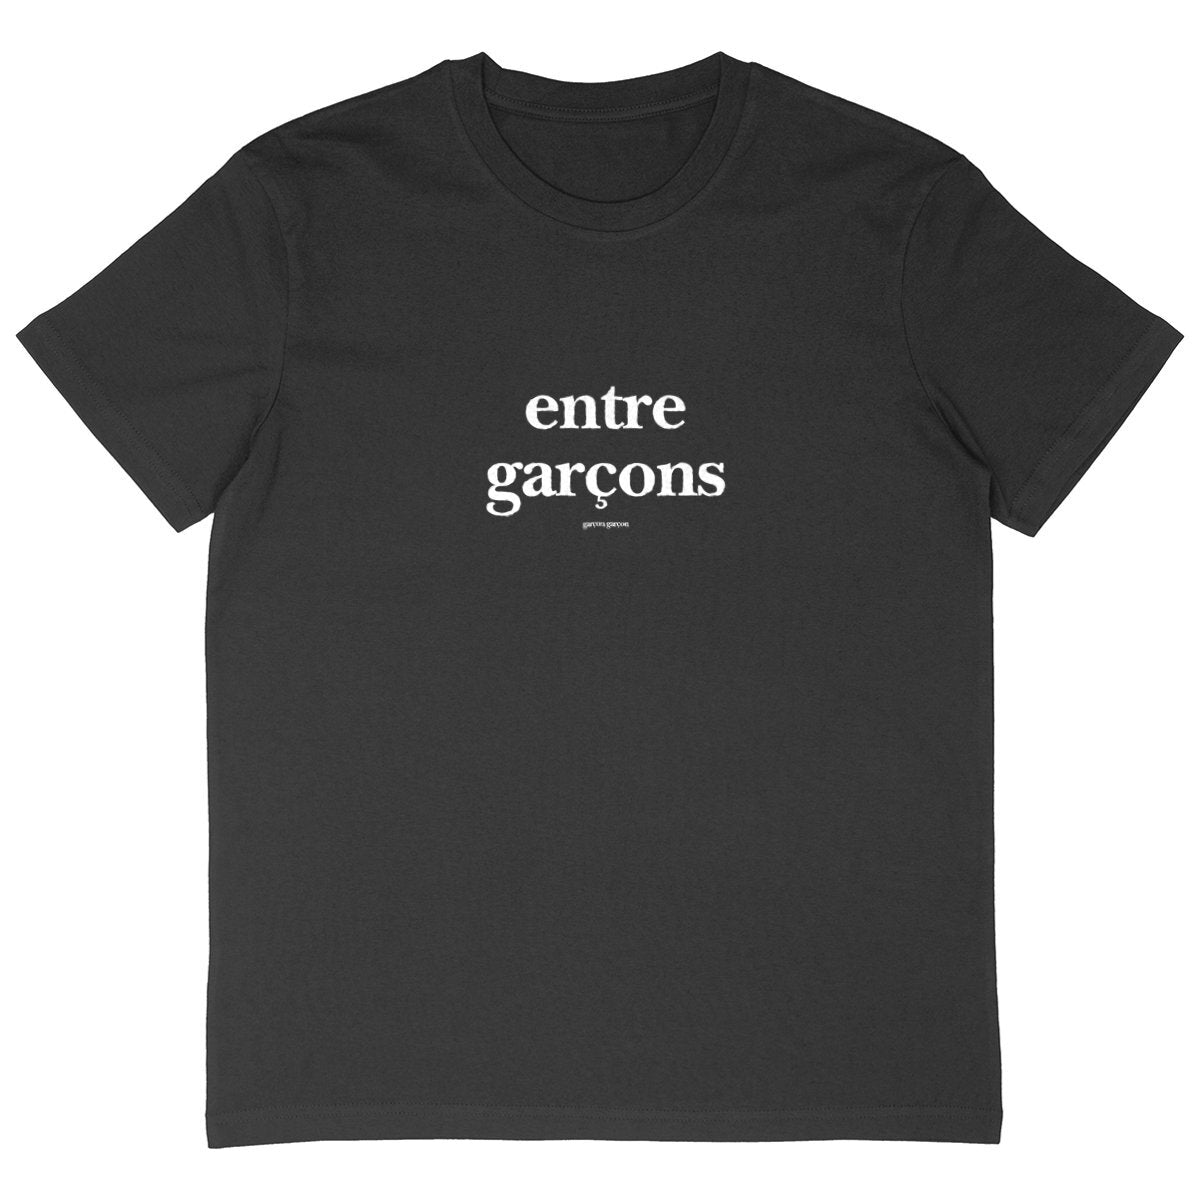 entre garçons oversize tee. garçon garçon tee oversize BLACK. Dive into the essence of Parisian cool with this oversized tee. The subtle 'garçon garçon' signature whispers a chic narrative, offering a slice of the city's famed elegance. Perfect for those who speak style with simplicity.